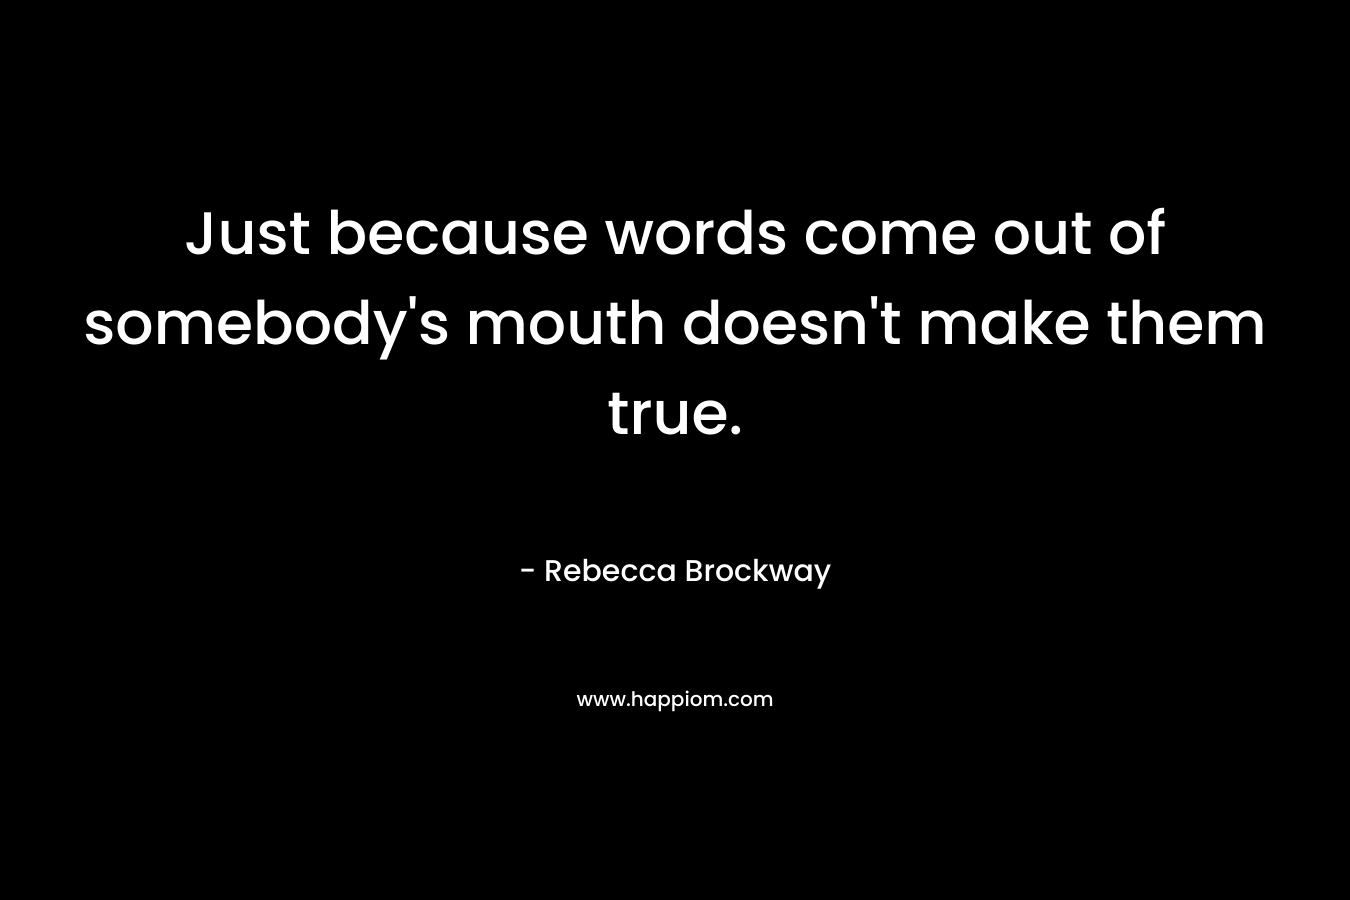 Just because words come out of somebody’s mouth doesn’t make them true. – Rebecca Brockway